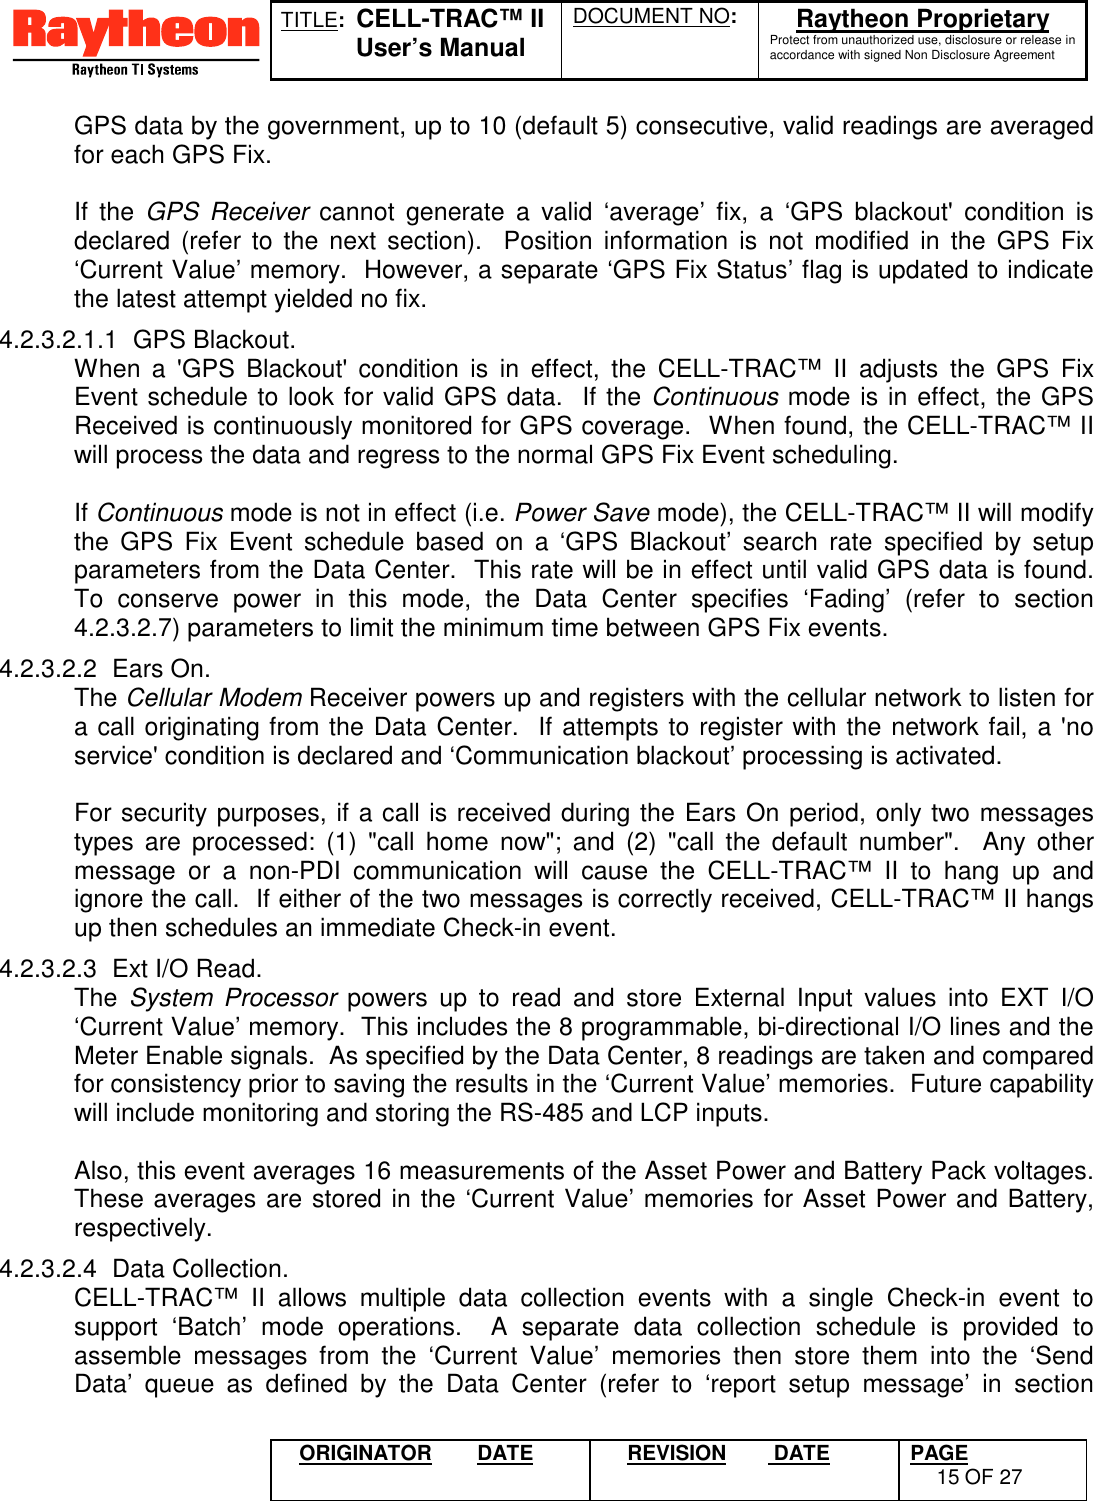 TITLE:  CELL-TRAC™ IIUser’s ManualDOCUMENT NO: Raytheon ProprietaryProtect from unauthorized use, disclosure or release inaccordance with signed Non Disclosure AgreementORIGINATOR DATE REVISION  DATE PAGE15 OF 27GPS data by the government, up to 10 (default 5) consecutive, valid readings are averagedfor each GPS Fix.If the GPS Receiver cannot generate a valid ‘average’ fix, a ‘GPS blackout&apos; condition isdeclared (refer to the next section).  Position information is not modified in the GPS Fix‘Current Value’ memory.  However, a separate ‘GPS Fix Status’ flag is updated to indicatethe latest attempt yielded no fix.4.2.3.2.1.1 GPS Blackout.When a &apos;GPS Blackout&apos; condition is in effect, the CELL-TRAC™ II adjusts the GPS FixEvent schedule to look for valid GPS data.  If the Continuous mode is in effect, the GPSReceived is continuously monitored for GPS coverage.  When found, the CELL-TRAC™ IIwill process the data and regress to the normal GPS Fix Event scheduling.If Continuous mode is not in effect (i.e. Power Save mode), the CELL-TRAC™ II will modifythe GPS Fix Event schedule based on a ‘GPS Blackout’ search rate specified by setupparameters from the Data Center.  This rate will be in effect until valid GPS data is found.To conserve power in this mode, the Data Center specifies ‘Fading’ (refer to section4.2.3.2.7) parameters to limit the minimum time between GPS Fix events.4.2.3.2.2 Ears On.The Cellular Modem Receiver powers up and registers with the cellular network to listen fora call originating from the Data Center.  If attempts to register with the network fail, a &apos;noservice&apos; condition is declared and ‘Communication blackout’ processing is activated.For security purposes, if a call is received during the Ears On period, only two messagestypes are processed: (1) &quot;call home now&quot;; and (2) &quot;call the default number&quot;.  Any othermessage or a non-PDI communication will cause the CELL-TRAC™ II to hang up andignore the call.  If either of the two messages is correctly received, CELL-TRAC™ II hangsup then schedules an immediate Check-in event.4.2.3.2.3  Ext I/O Read.The  System Processor powers up to read and store External Input values into EXT I/O‘Current Value’ memory.  This includes the 8 programmable, bi-directional I/O lines and theMeter Enable signals.  As specified by the Data Center, 8 readings are taken and comparedfor consistency prior to saving the results in the ‘Current Value’ memories.  Future capabilitywill include monitoring and storing the RS-485 and LCP inputs.Also, this event averages 16 measurements of the Asset Power and Battery Pack voltages.These averages are stored in the ‘Current Value’ memories for Asset Power and Battery,respectively.4.2.3.2.4 Data Collection.CELL-TRAC™ II allows multiple data collection events with a single Check-in event tosupport ‘Batch’ mode operations.  A separate data collection schedule is provided toassemble messages from the ‘Current Value’ memories then store them into the ‘SendData’ queue as defined by the Data Center (refer to ‘report setup message’ in section